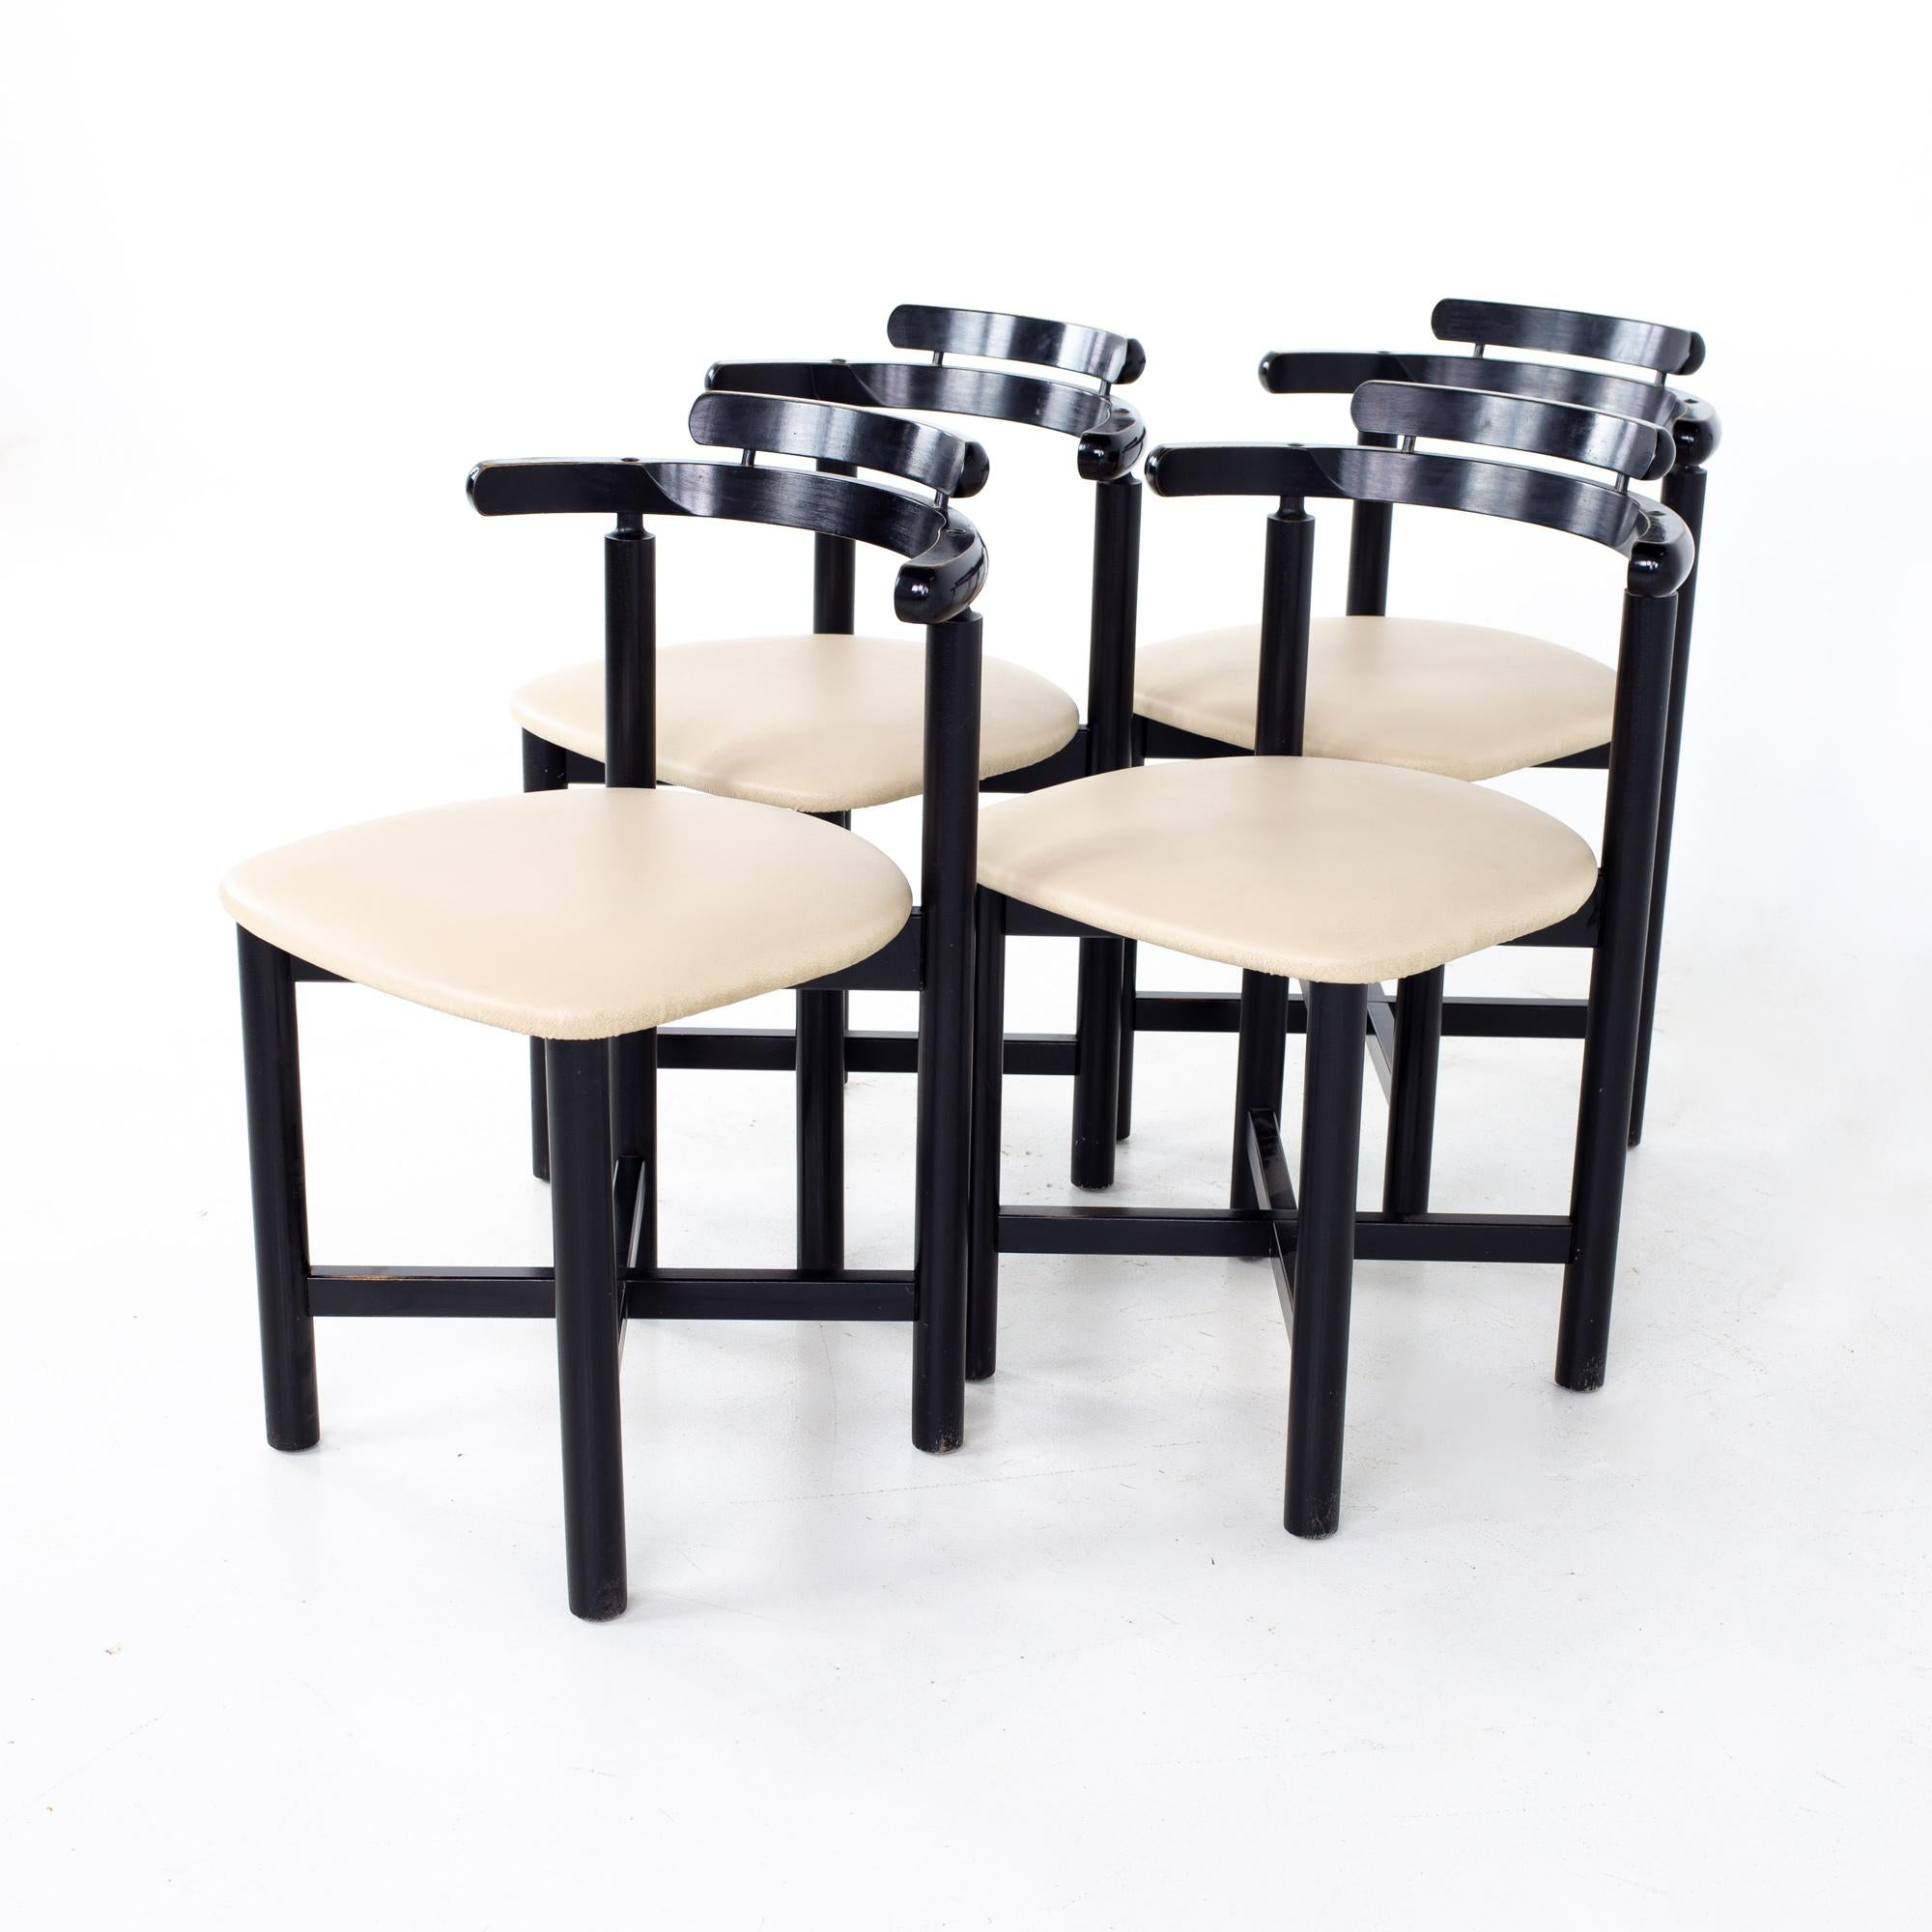 Mobelfabrik mid century small chairs - Set of 4
Each chair measures: 19.5 wide x 15 deep x 29.75 high, with a seat height of 18 inches

All pieces of furniture can be had in what we call restored vintage condition. That means the piece is